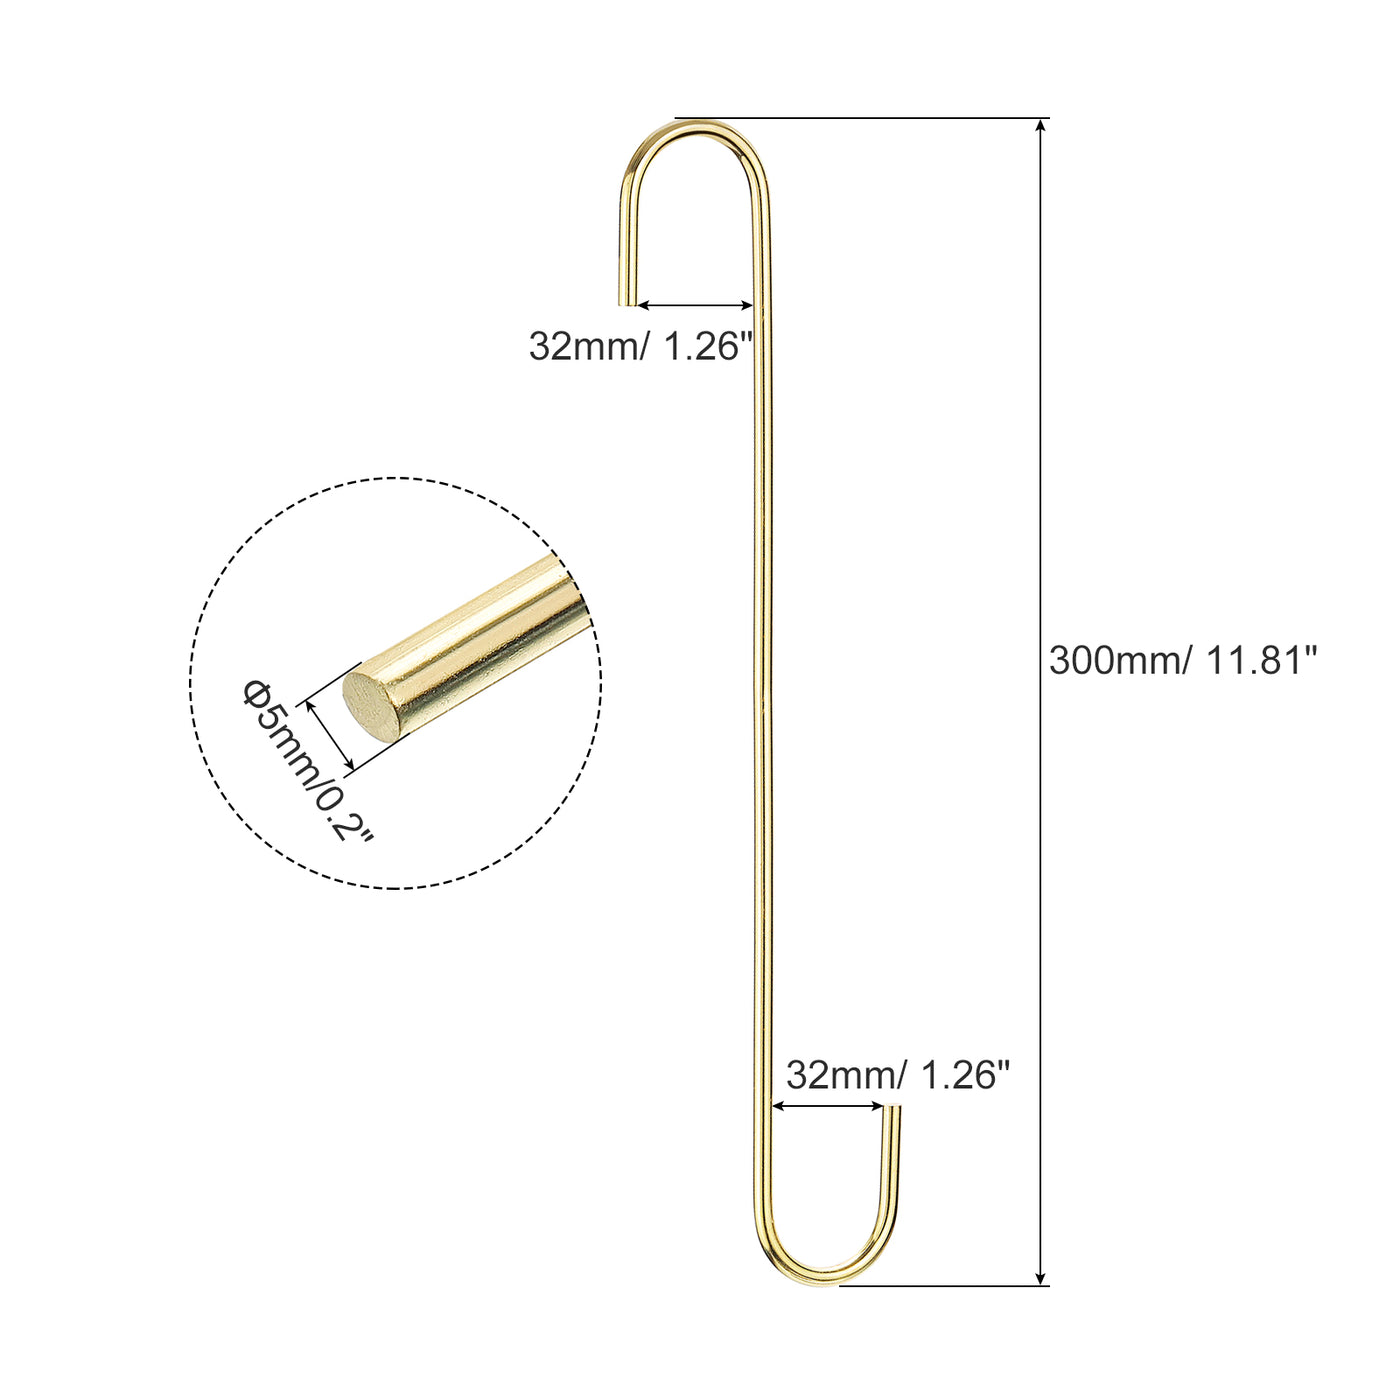 uxcell Uxcell S Hanging Hooks, 12inch(300mm) Extra Long Steel Hanger, Indoor Outdoor Uses for Garden, Bathroom, Closet, Workshop, Kitchen, Gold Tone, 2Pcs